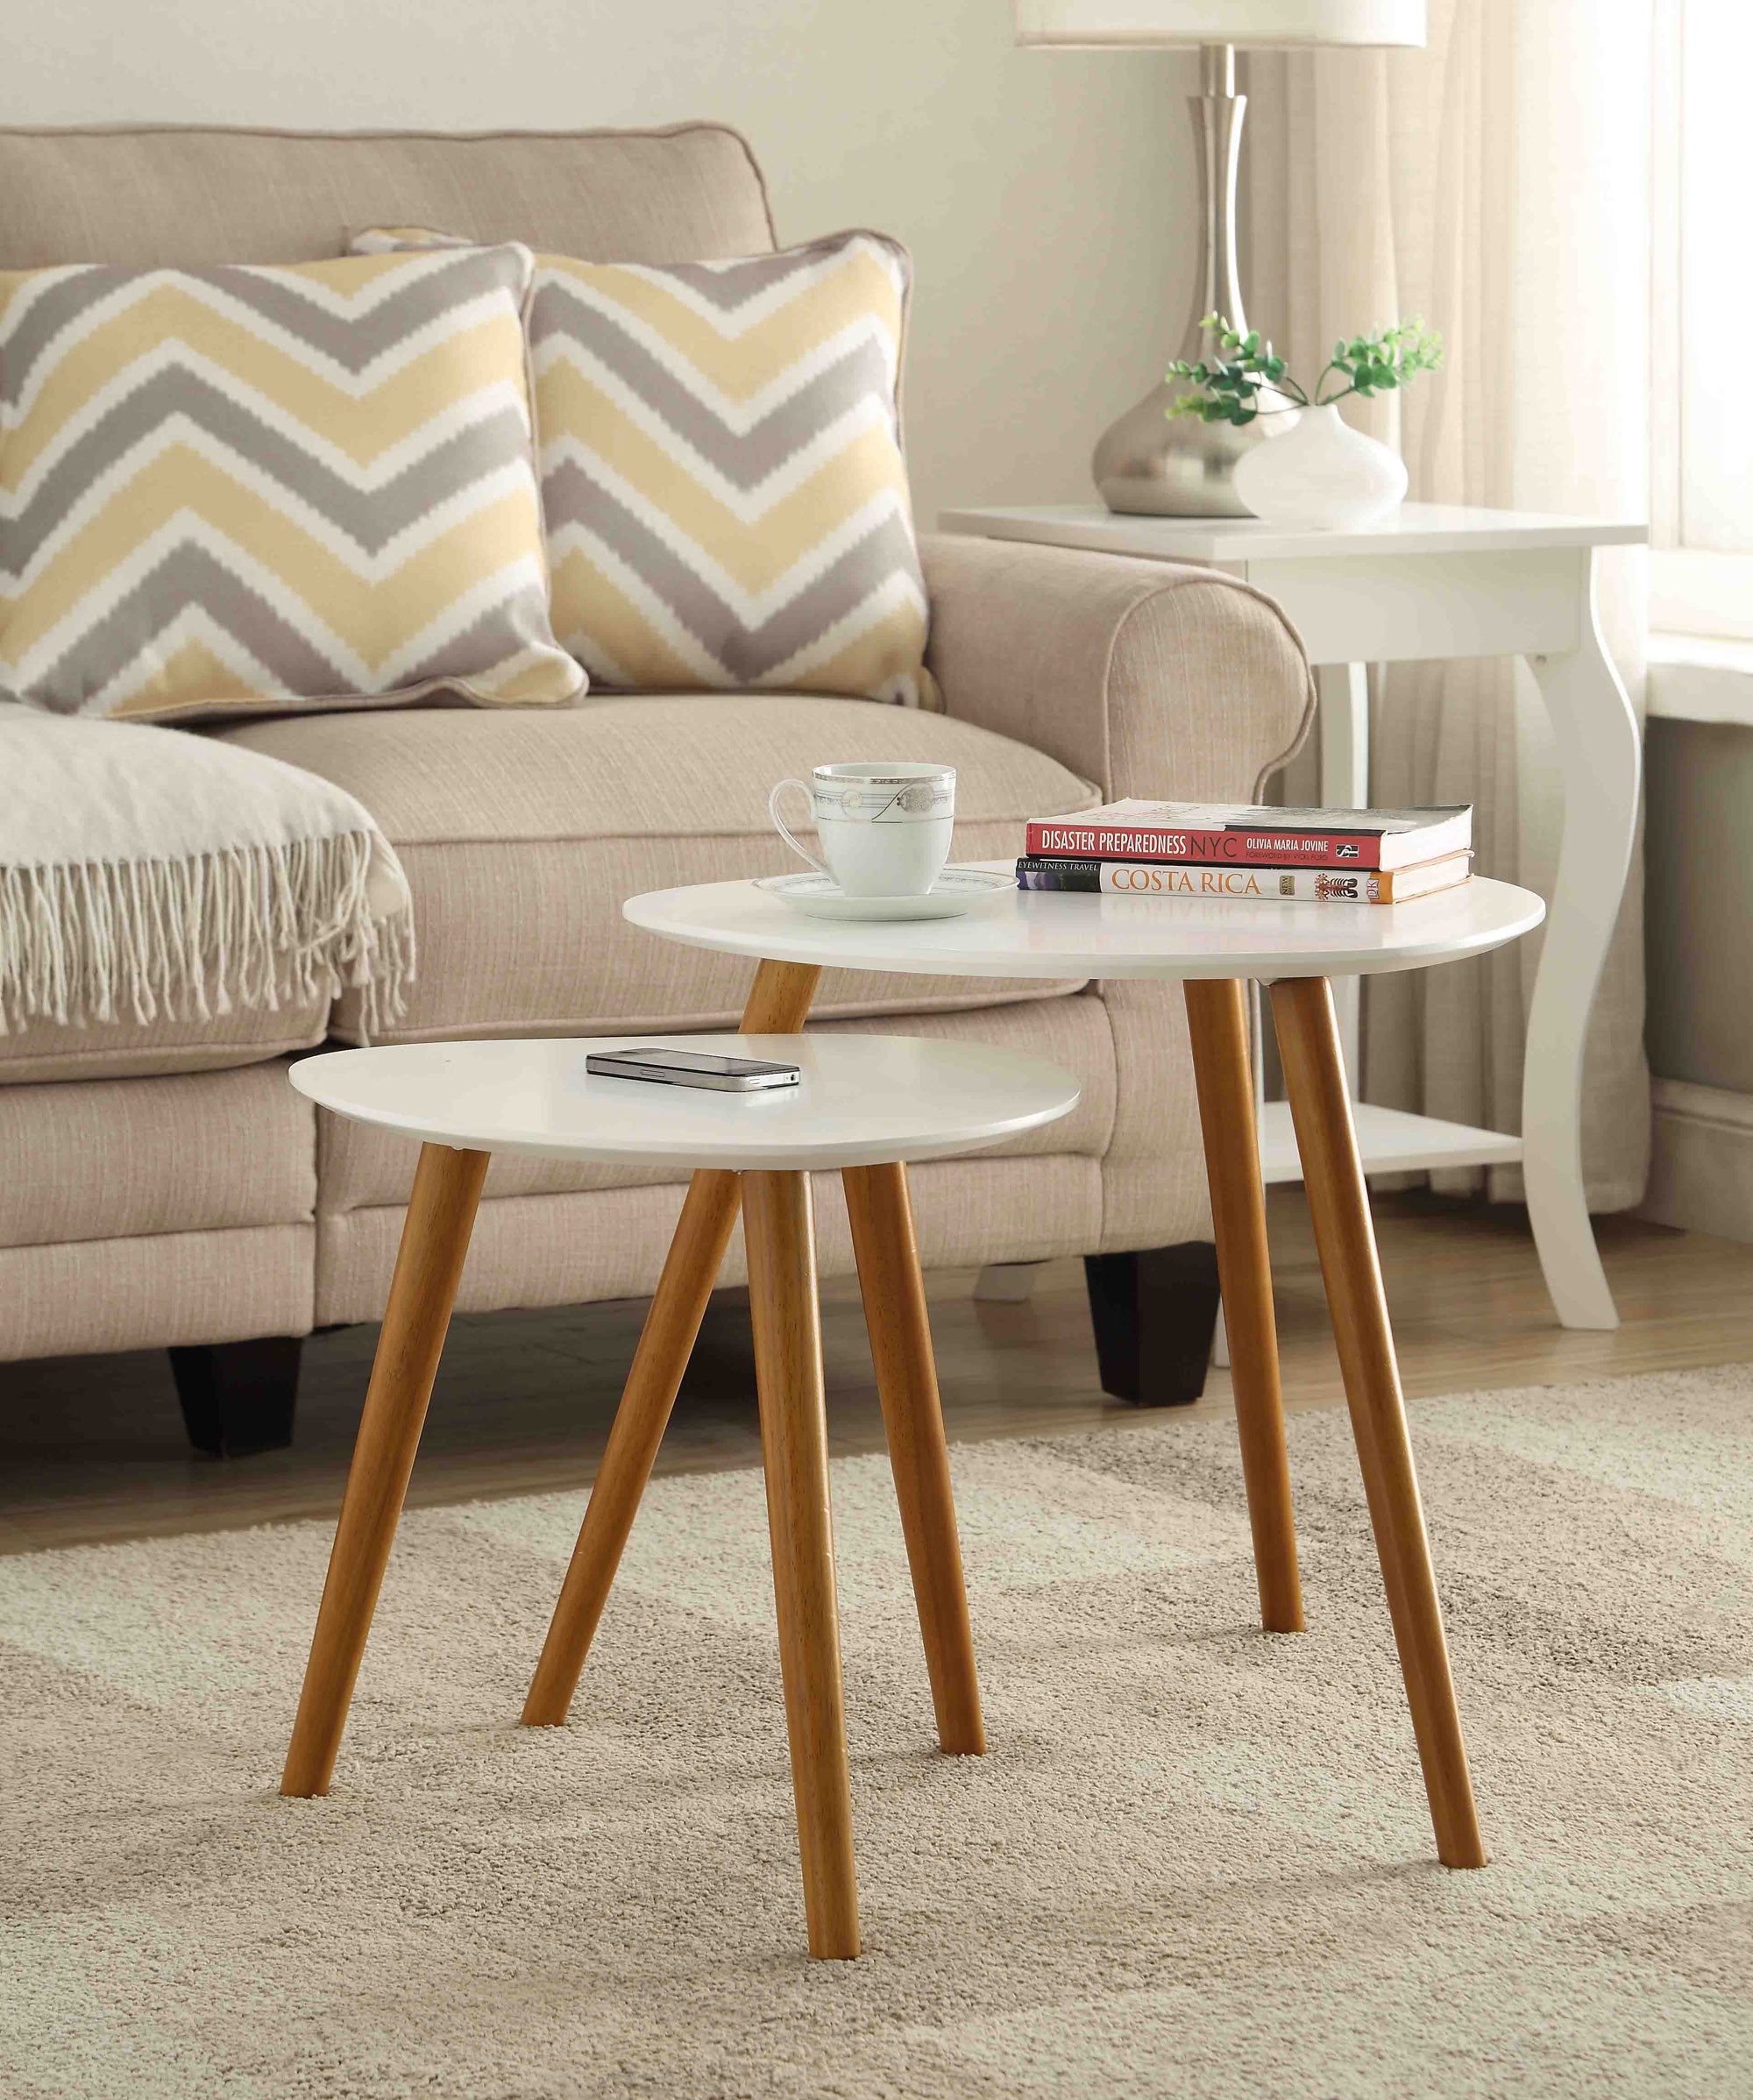 Two small white and brown end tables